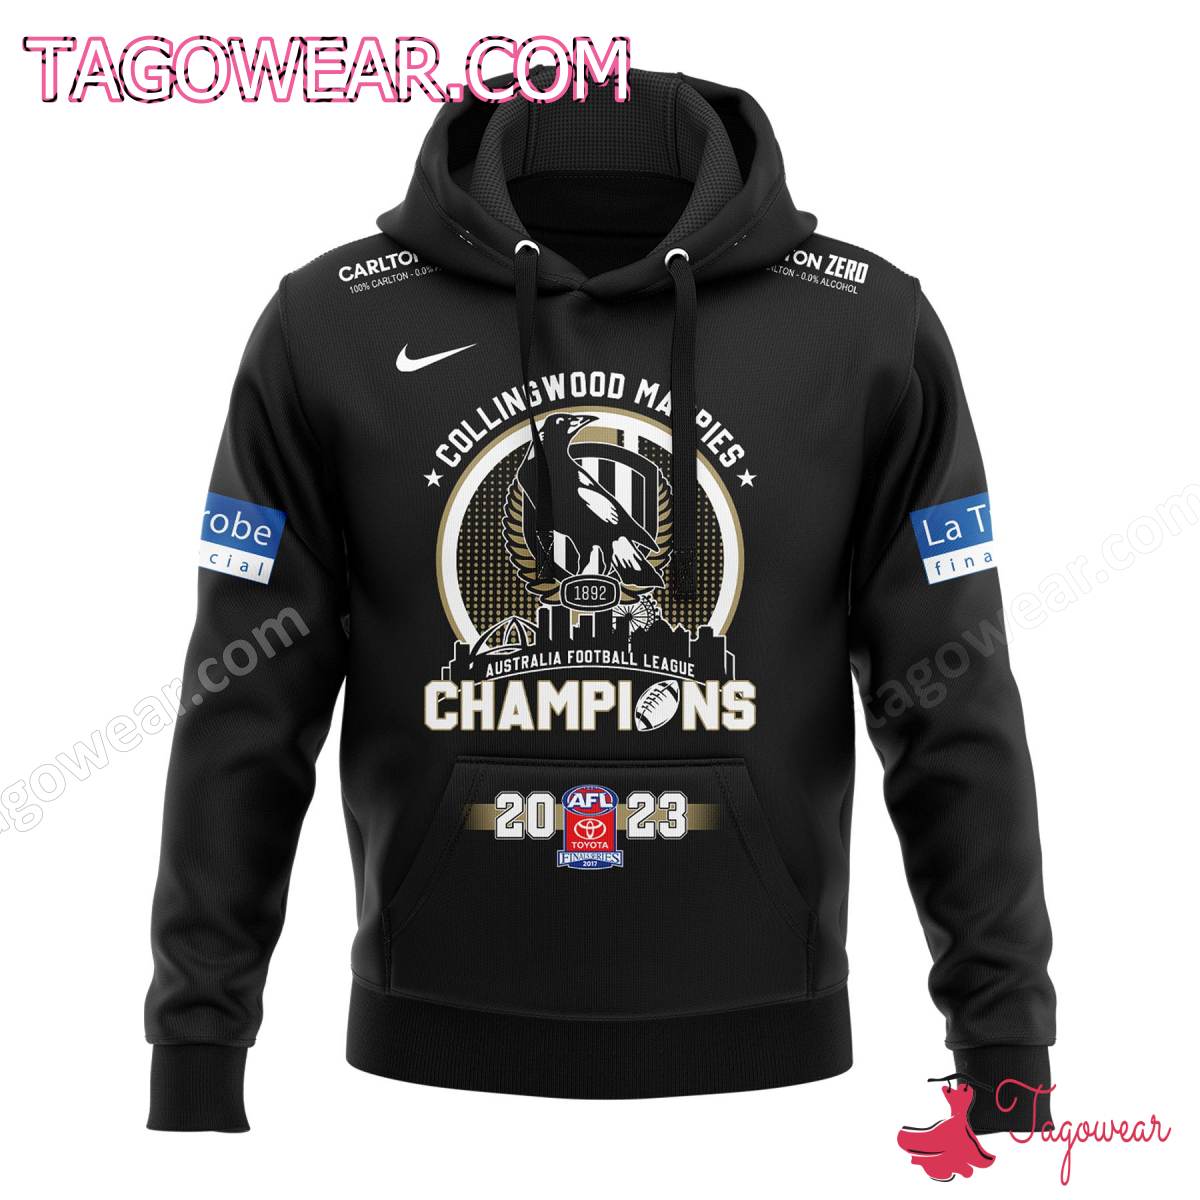 Collingwood Magpies Australian Football League Champions 2023 Hoodie a